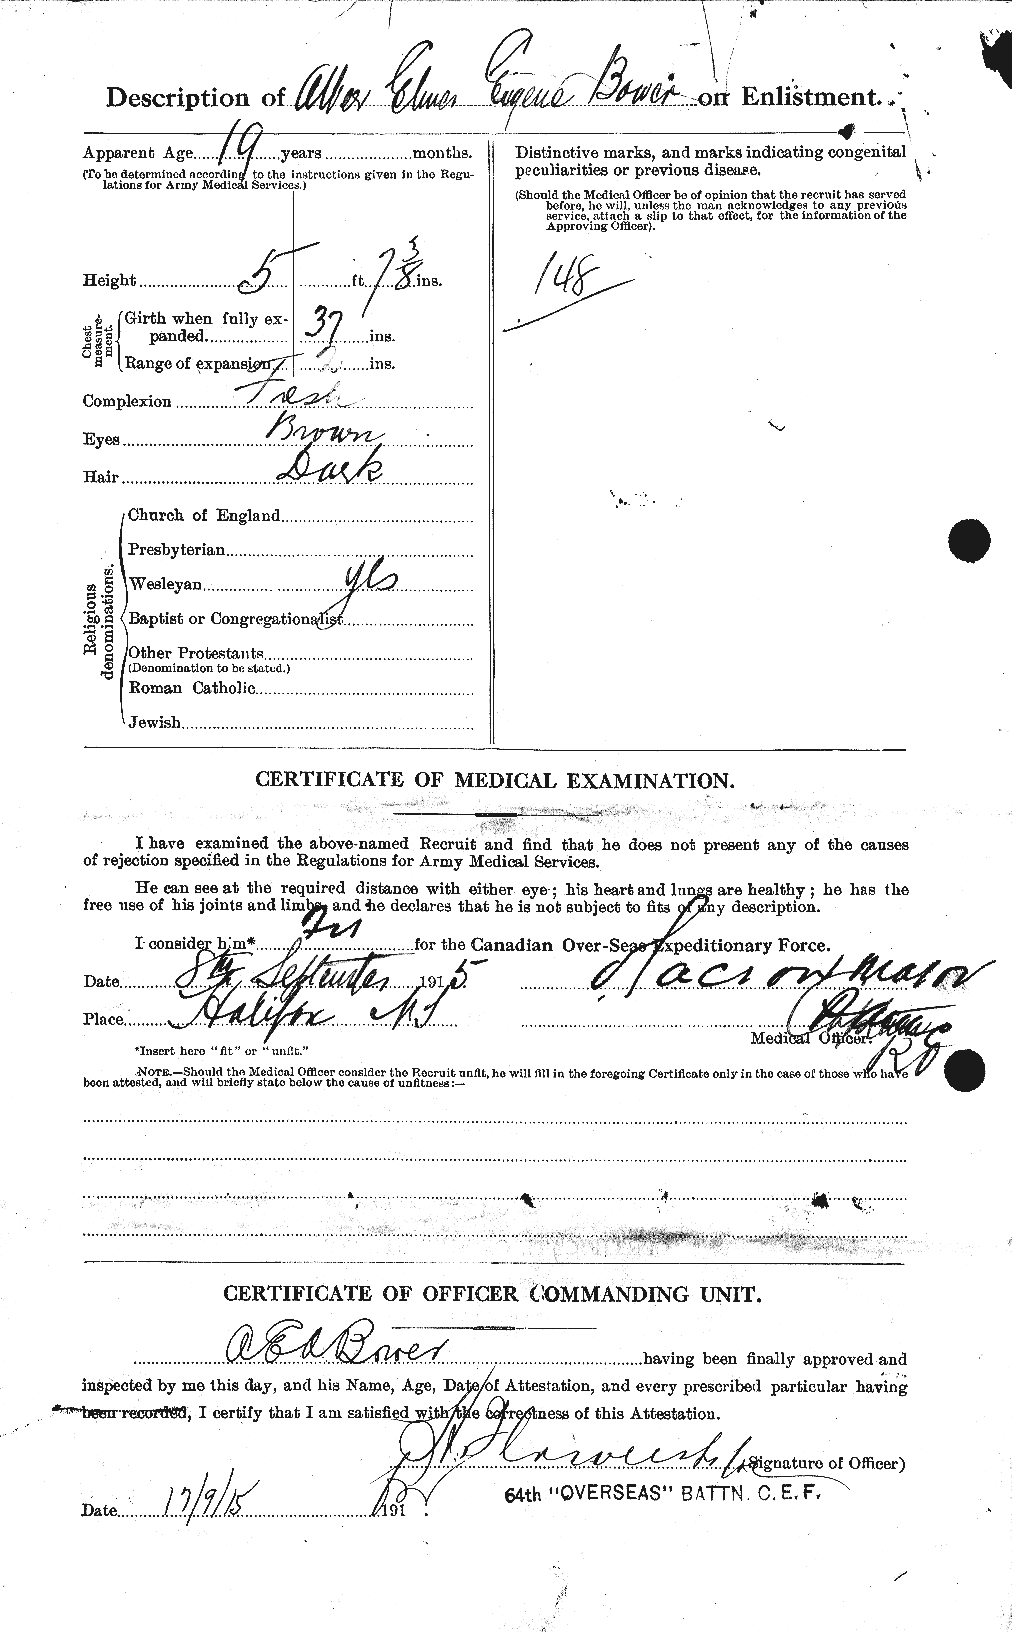 Personnel Records of the First World War - CEF 255346b